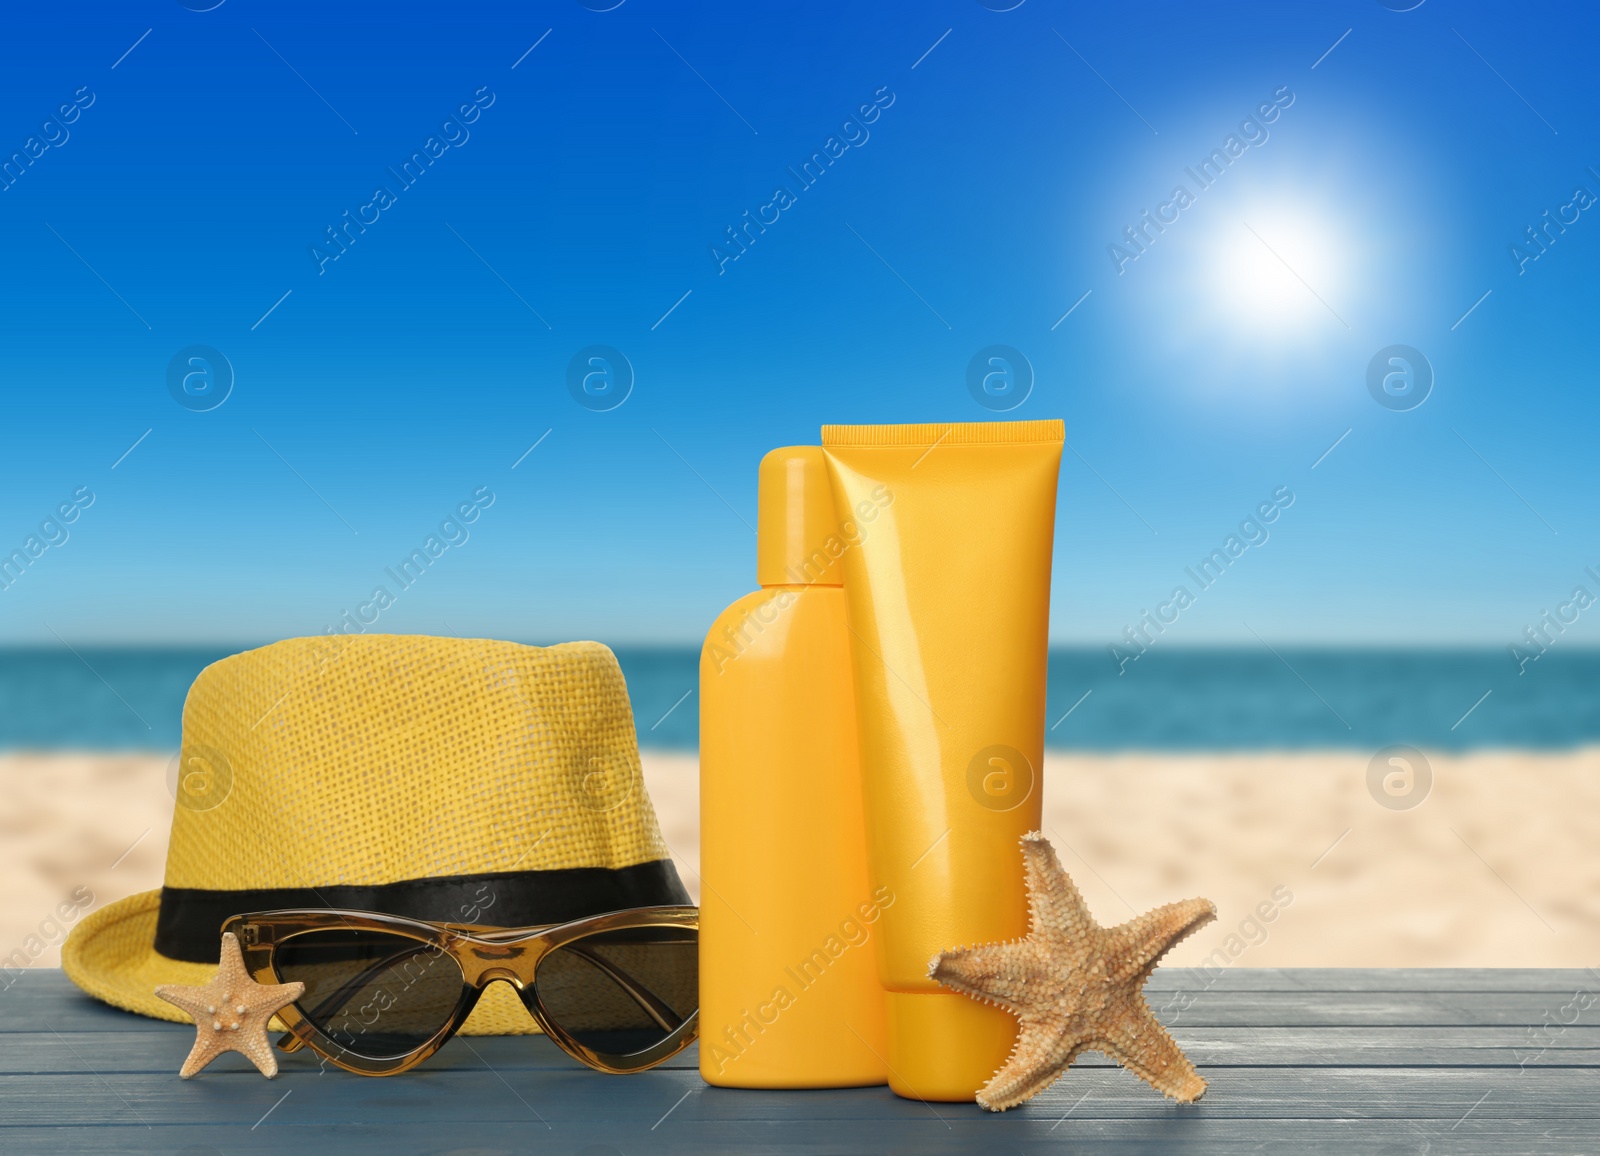 Image of Skin sun protection products and beach accessories on blue wooden table against seascape. Space for design